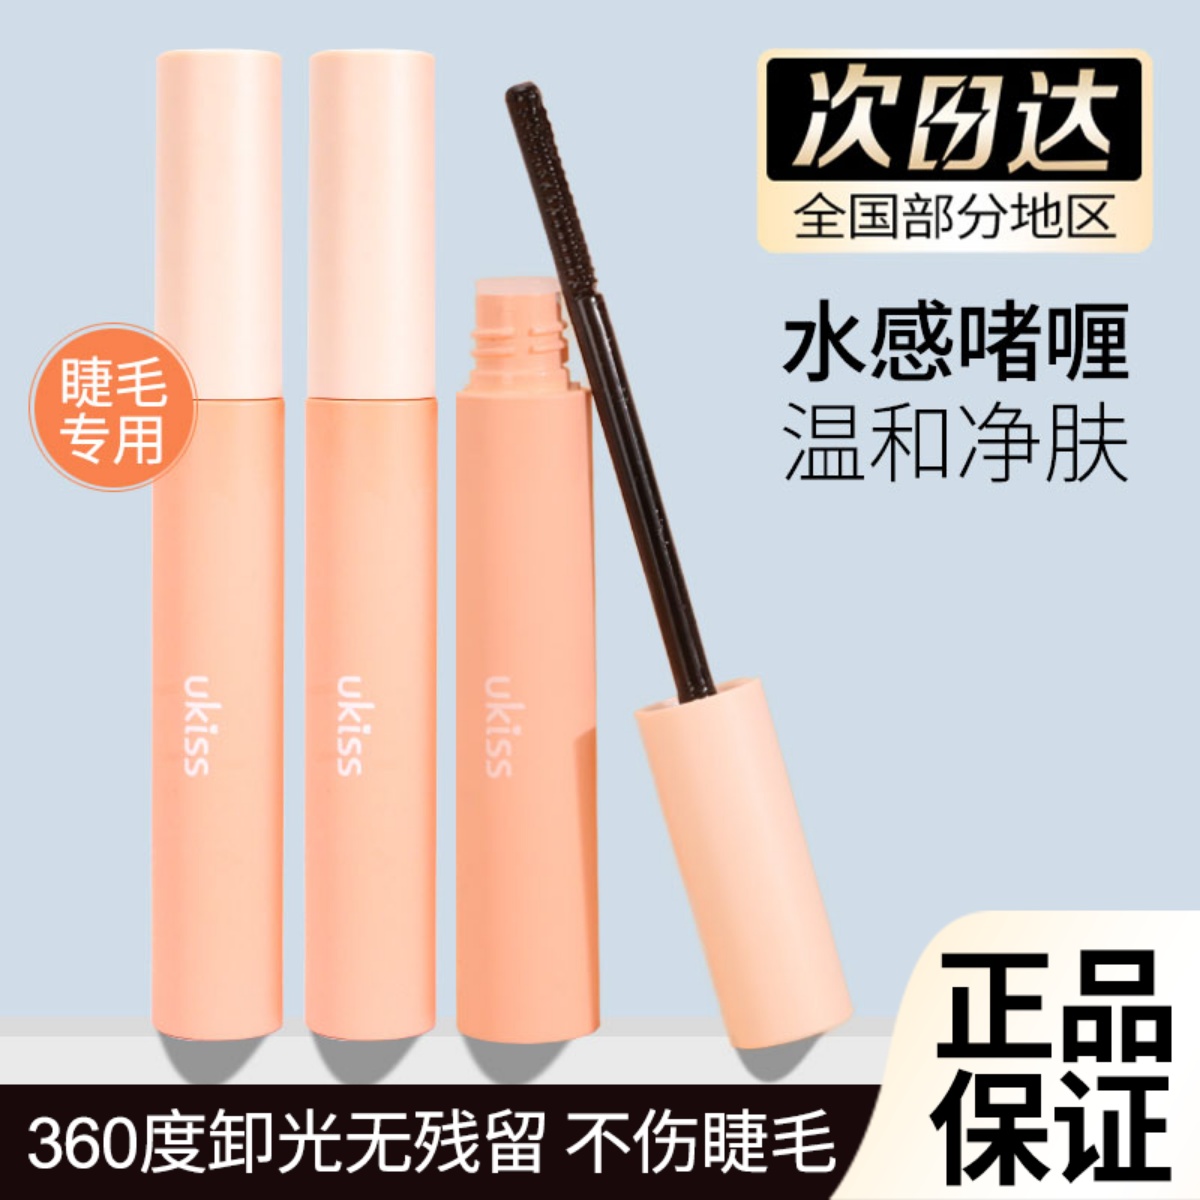 Ukiss eye black makeup remover portable mascara primer mild non irritating remover special quick cleaning